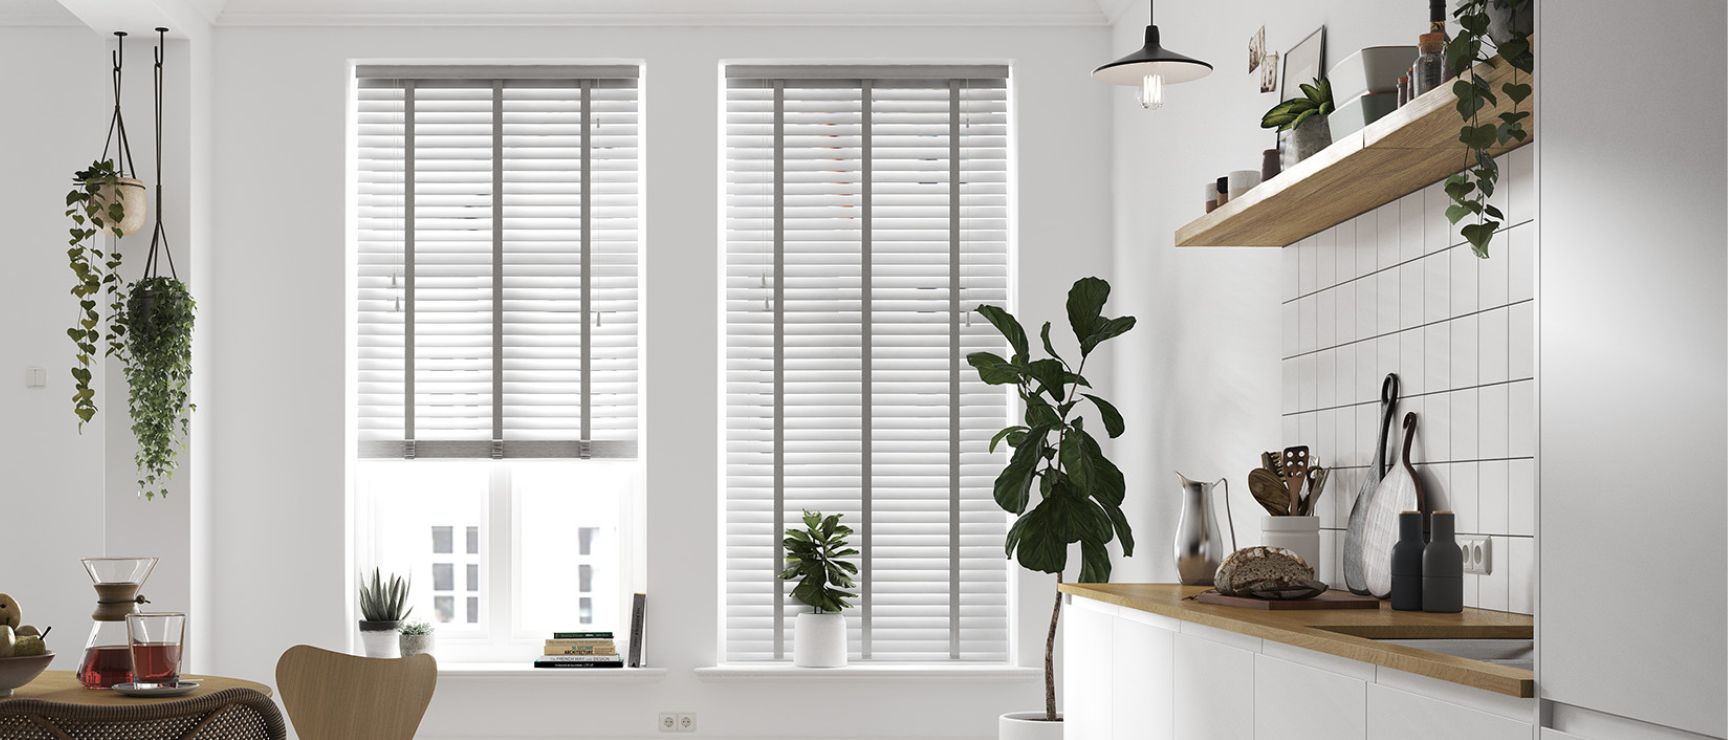 The Ultimate Guide to Buying Blinds